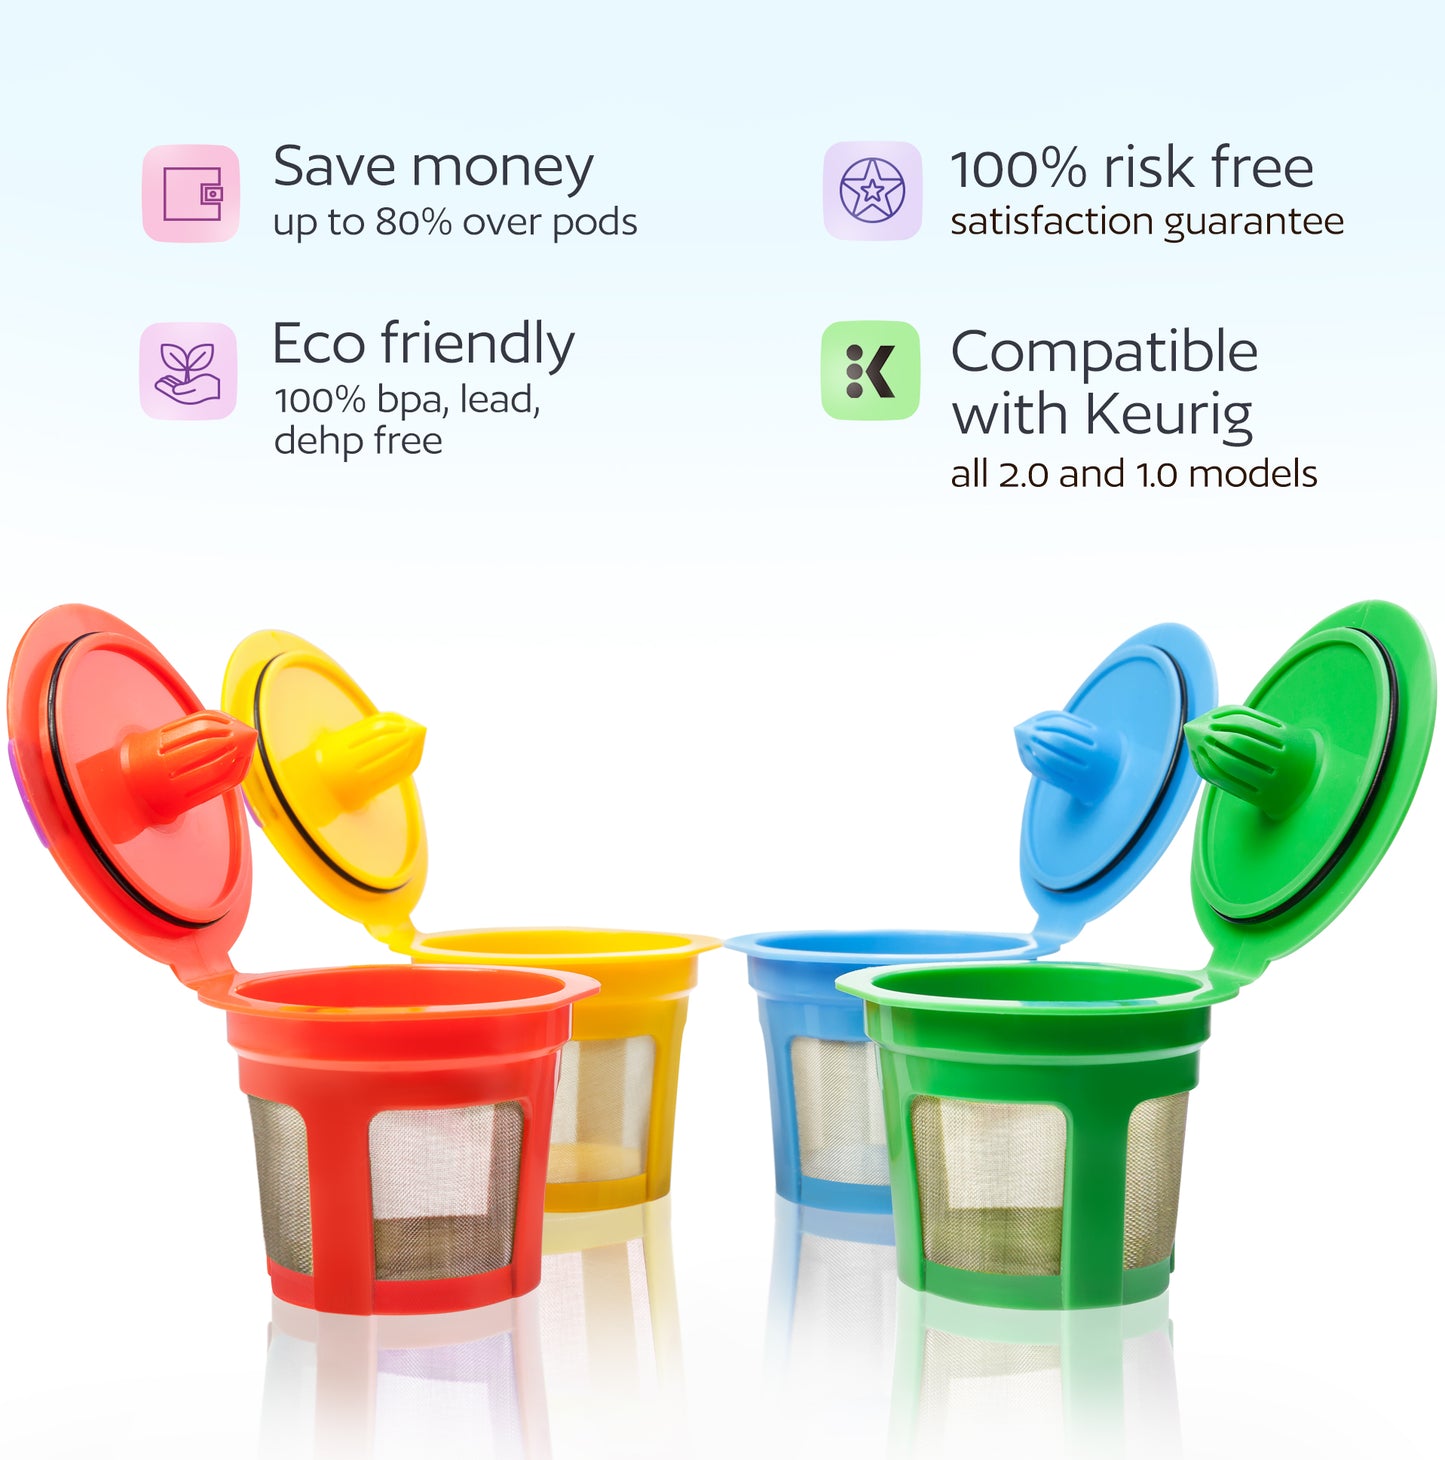 4 Reusable K Cups for Keurig - Universal Fit 1.0 & 2.0 Keurig Coffee Makers - 4 Colors Refillable Kcups Coffee Filters for all Keurig Brewers Family